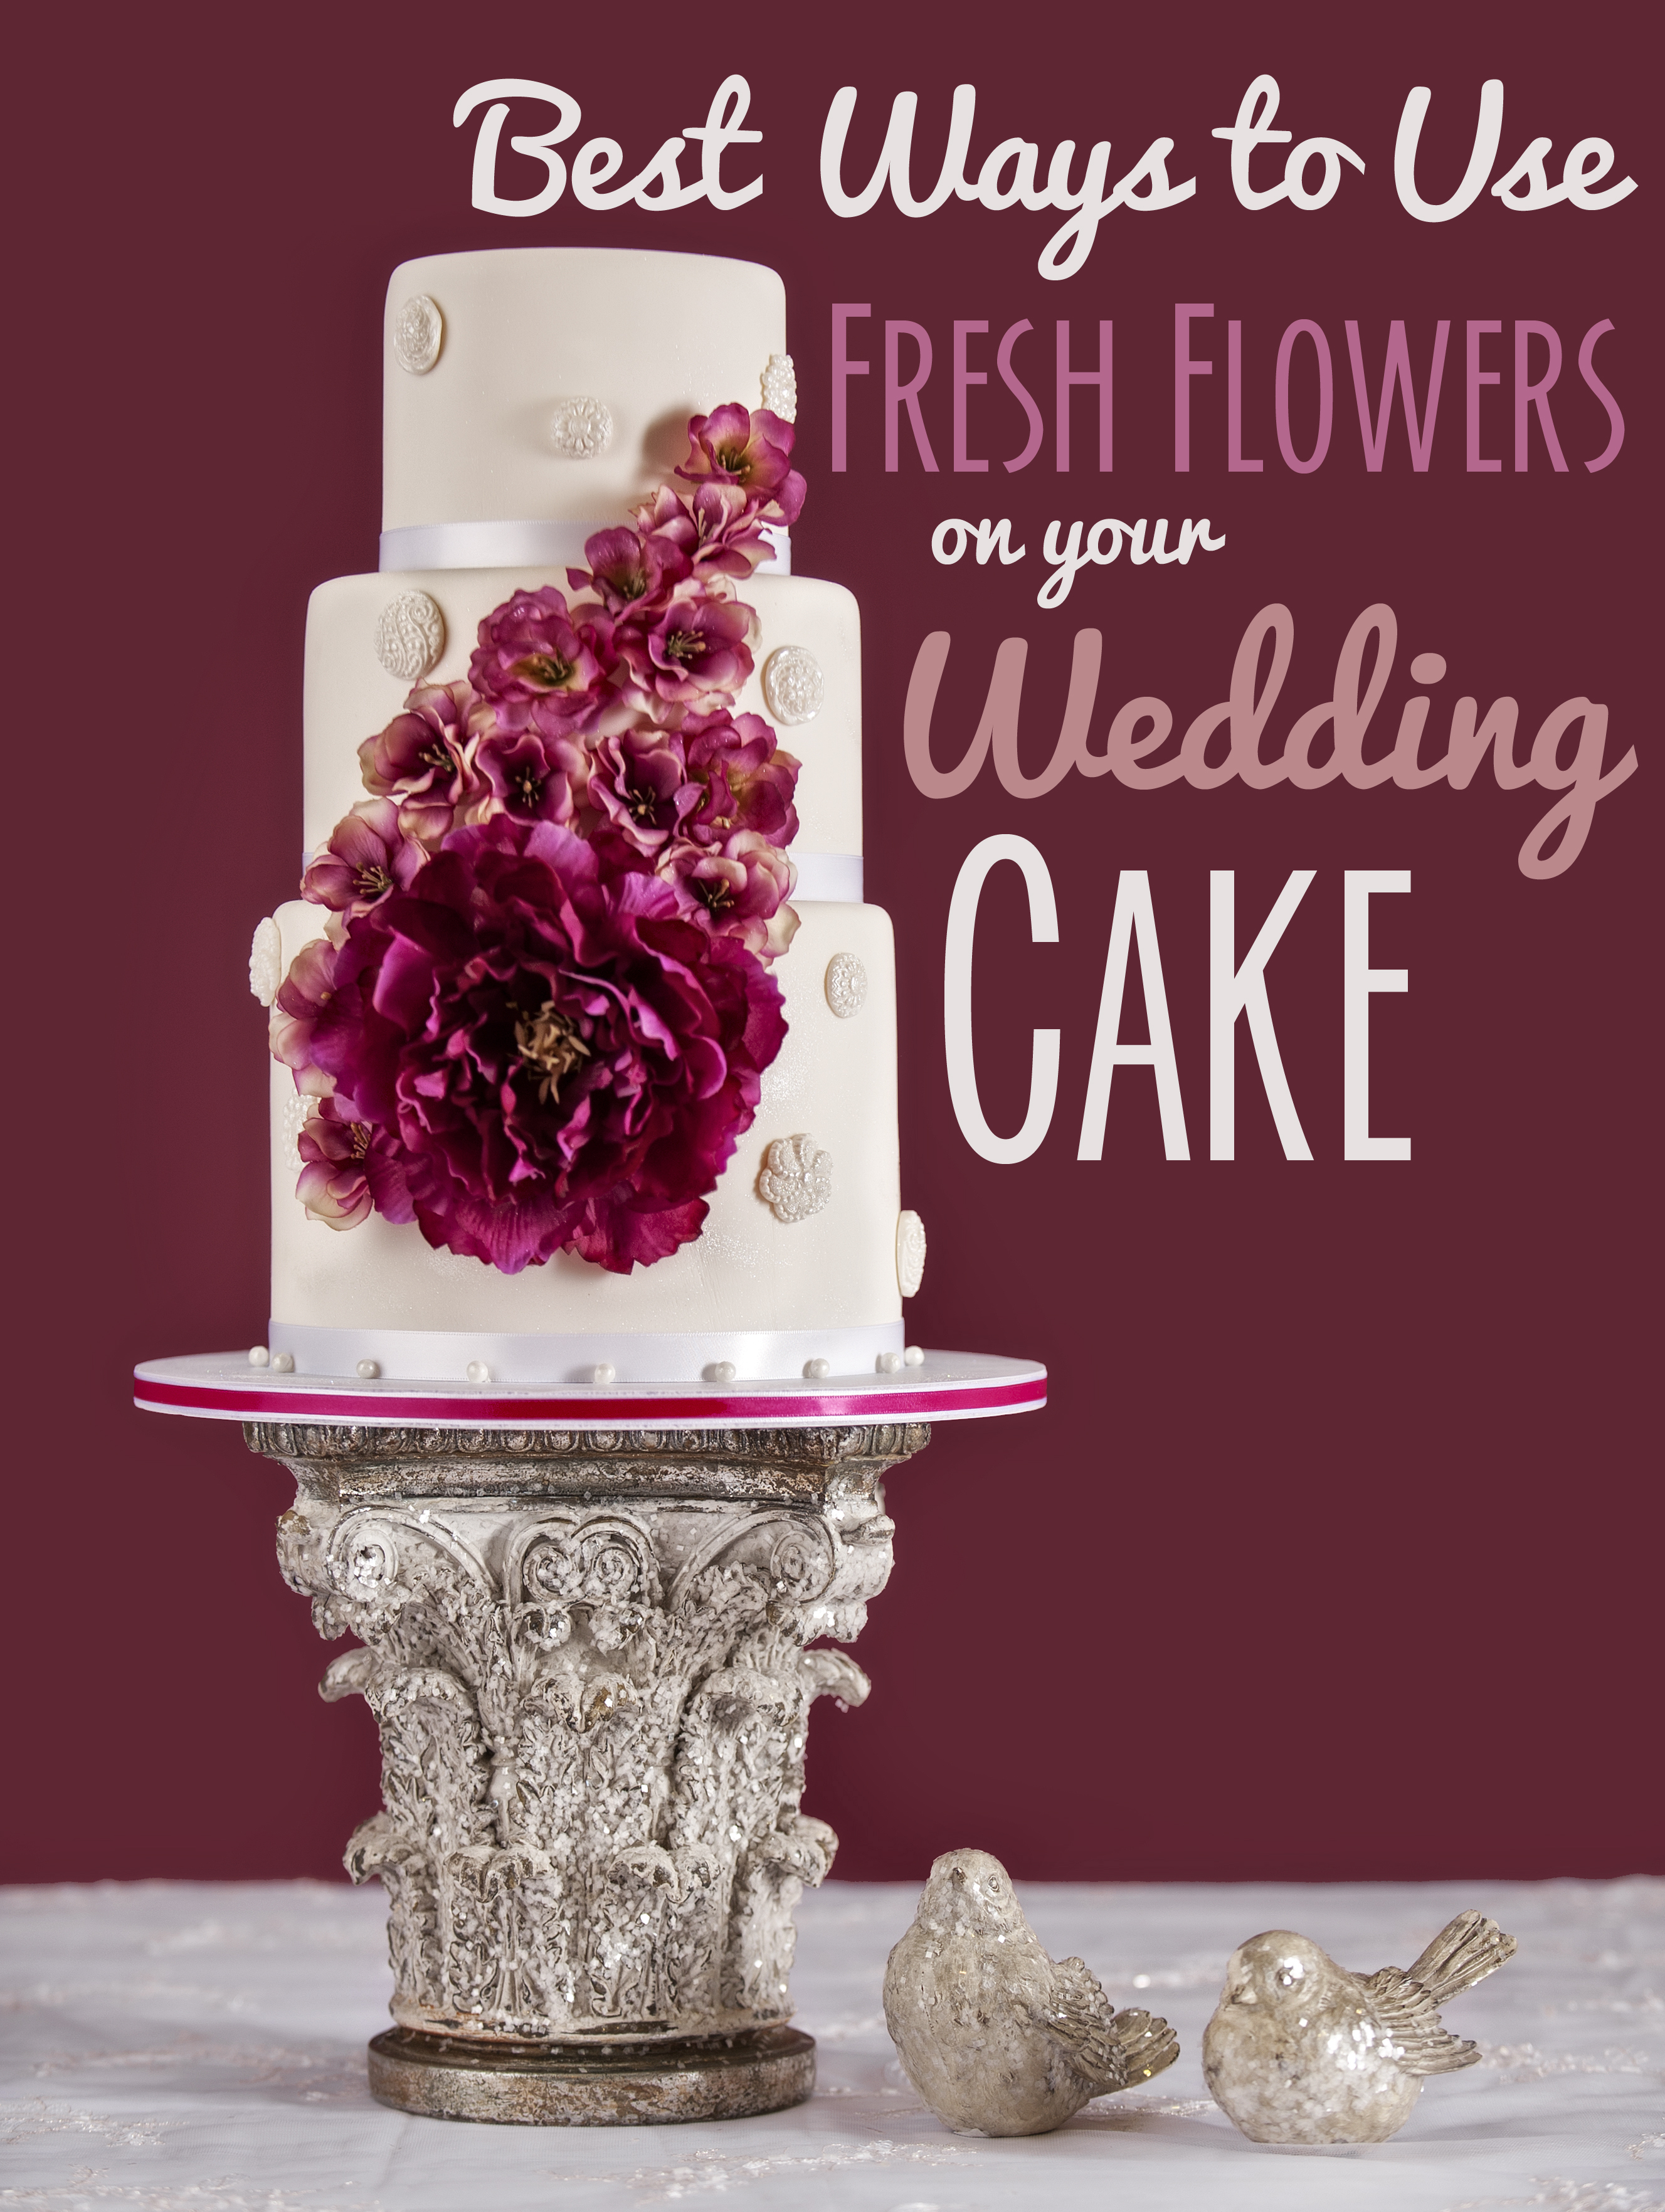 Best Ways to Use Fresh Flowers on your Wedding Cake | Temple Square